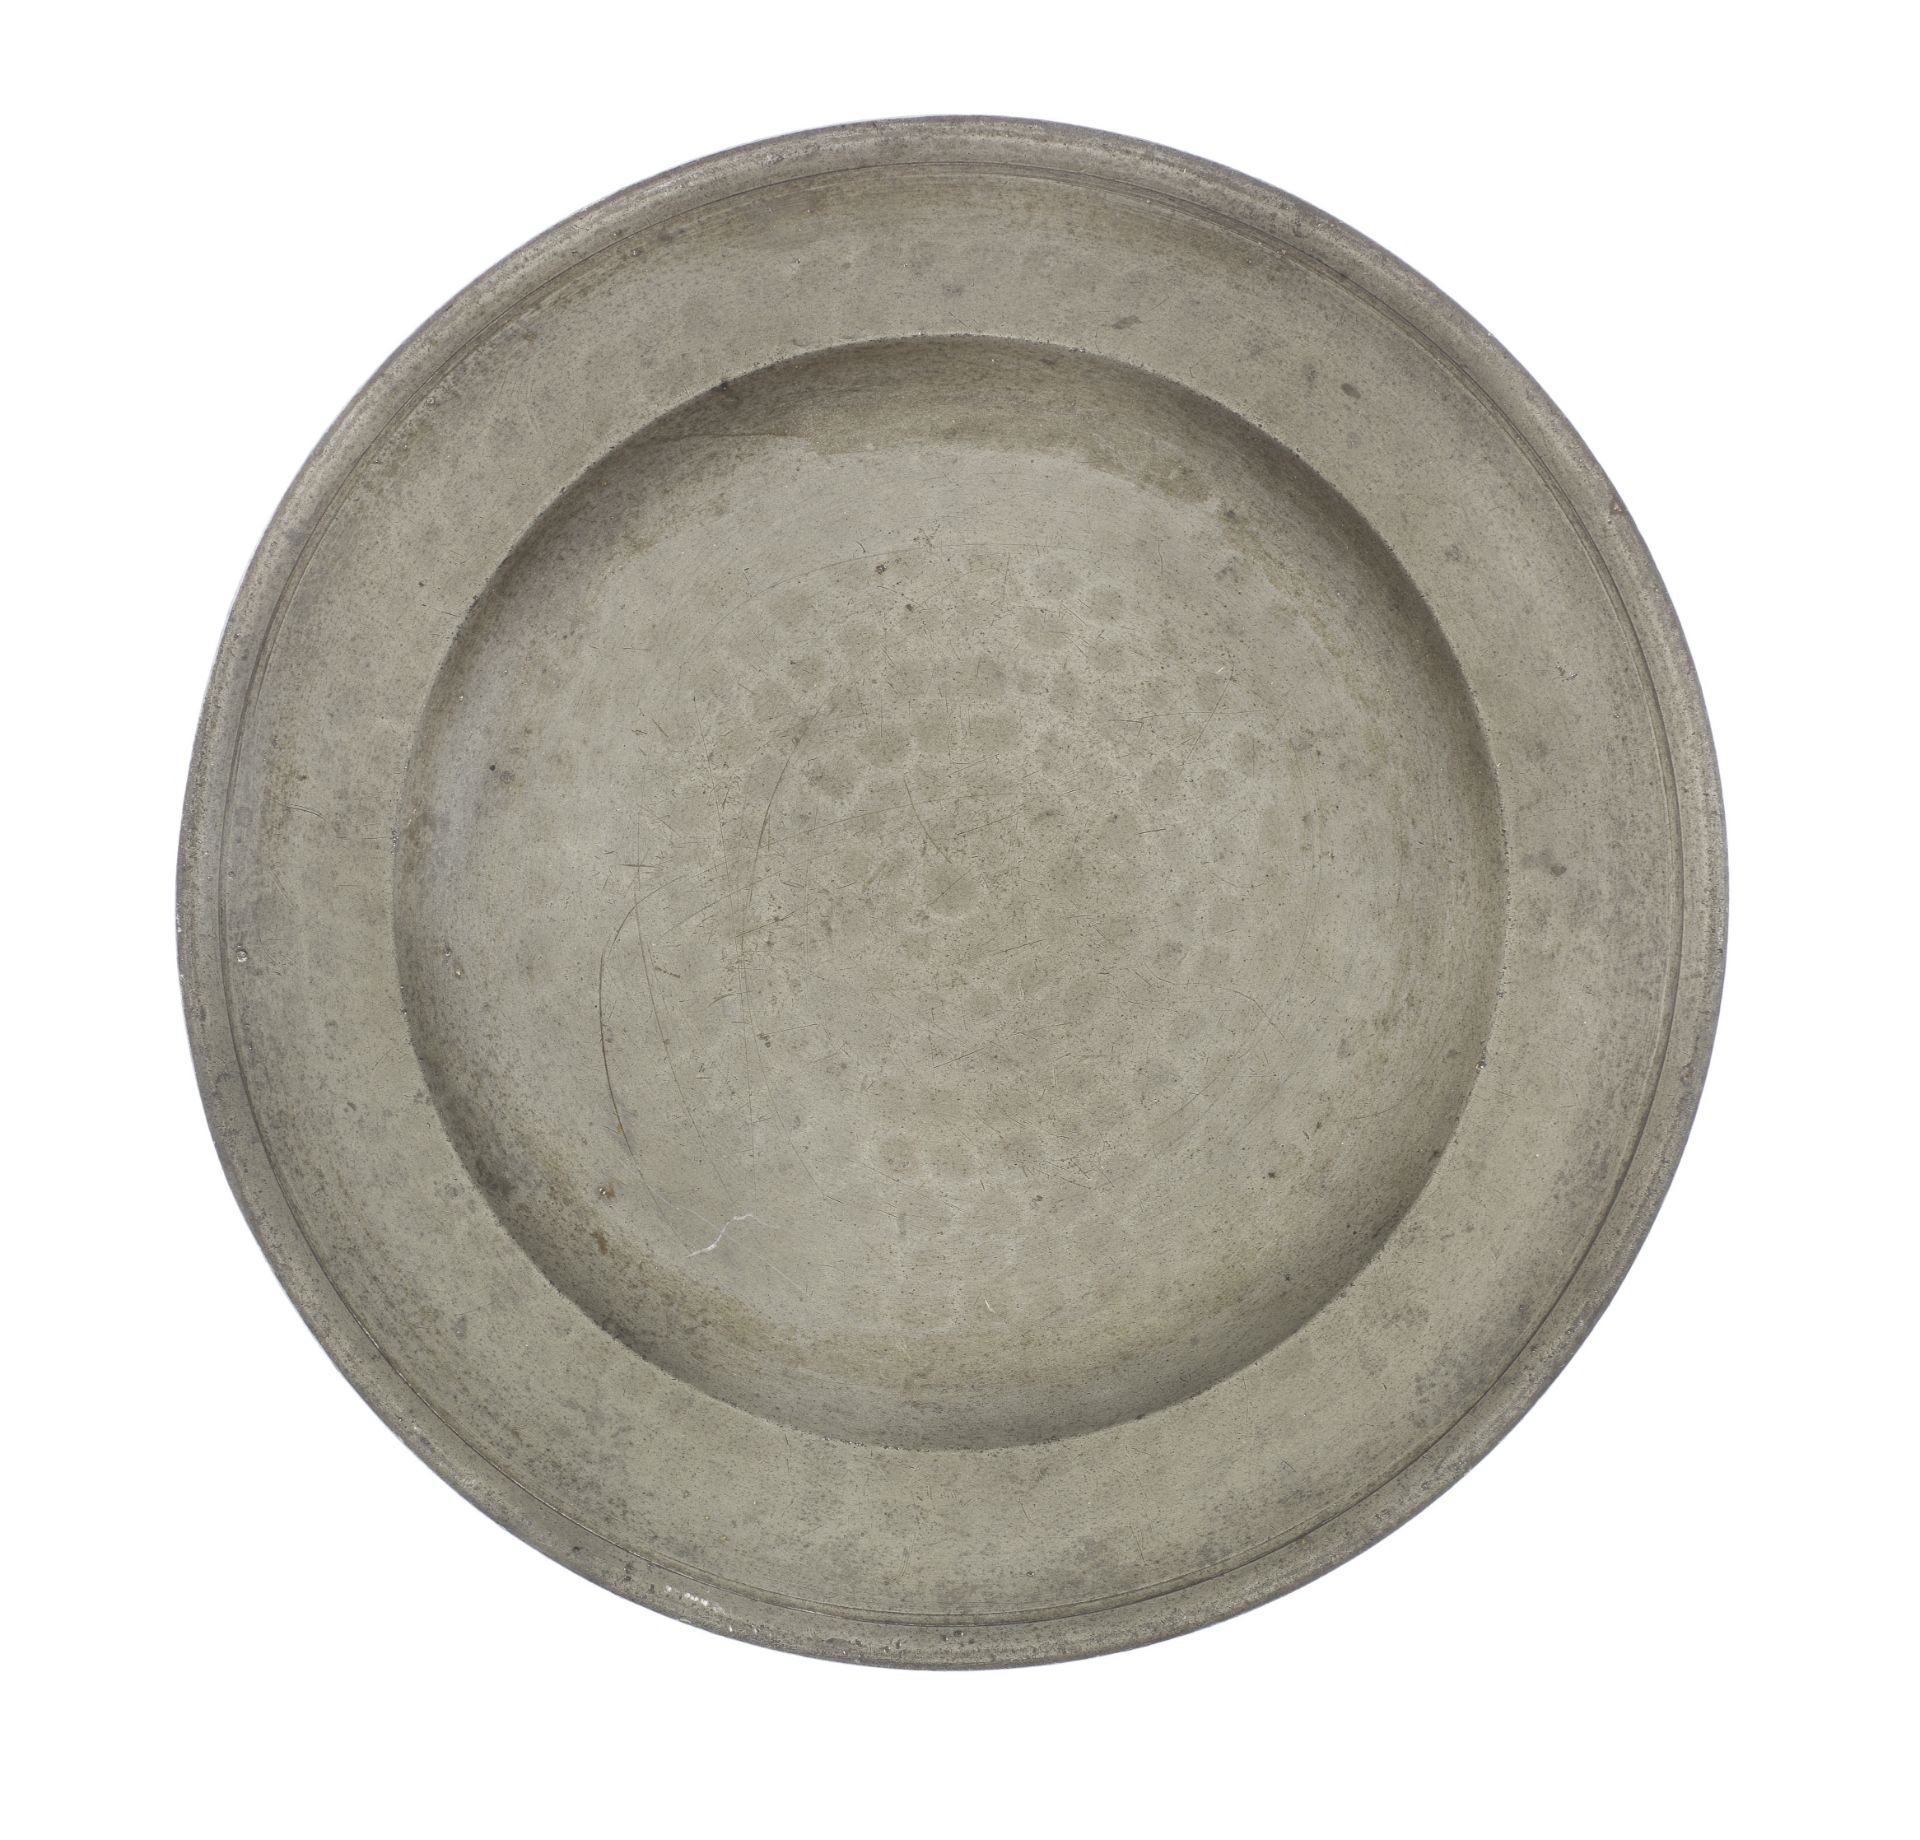 A George II pewter single reeded plate, circa 1735